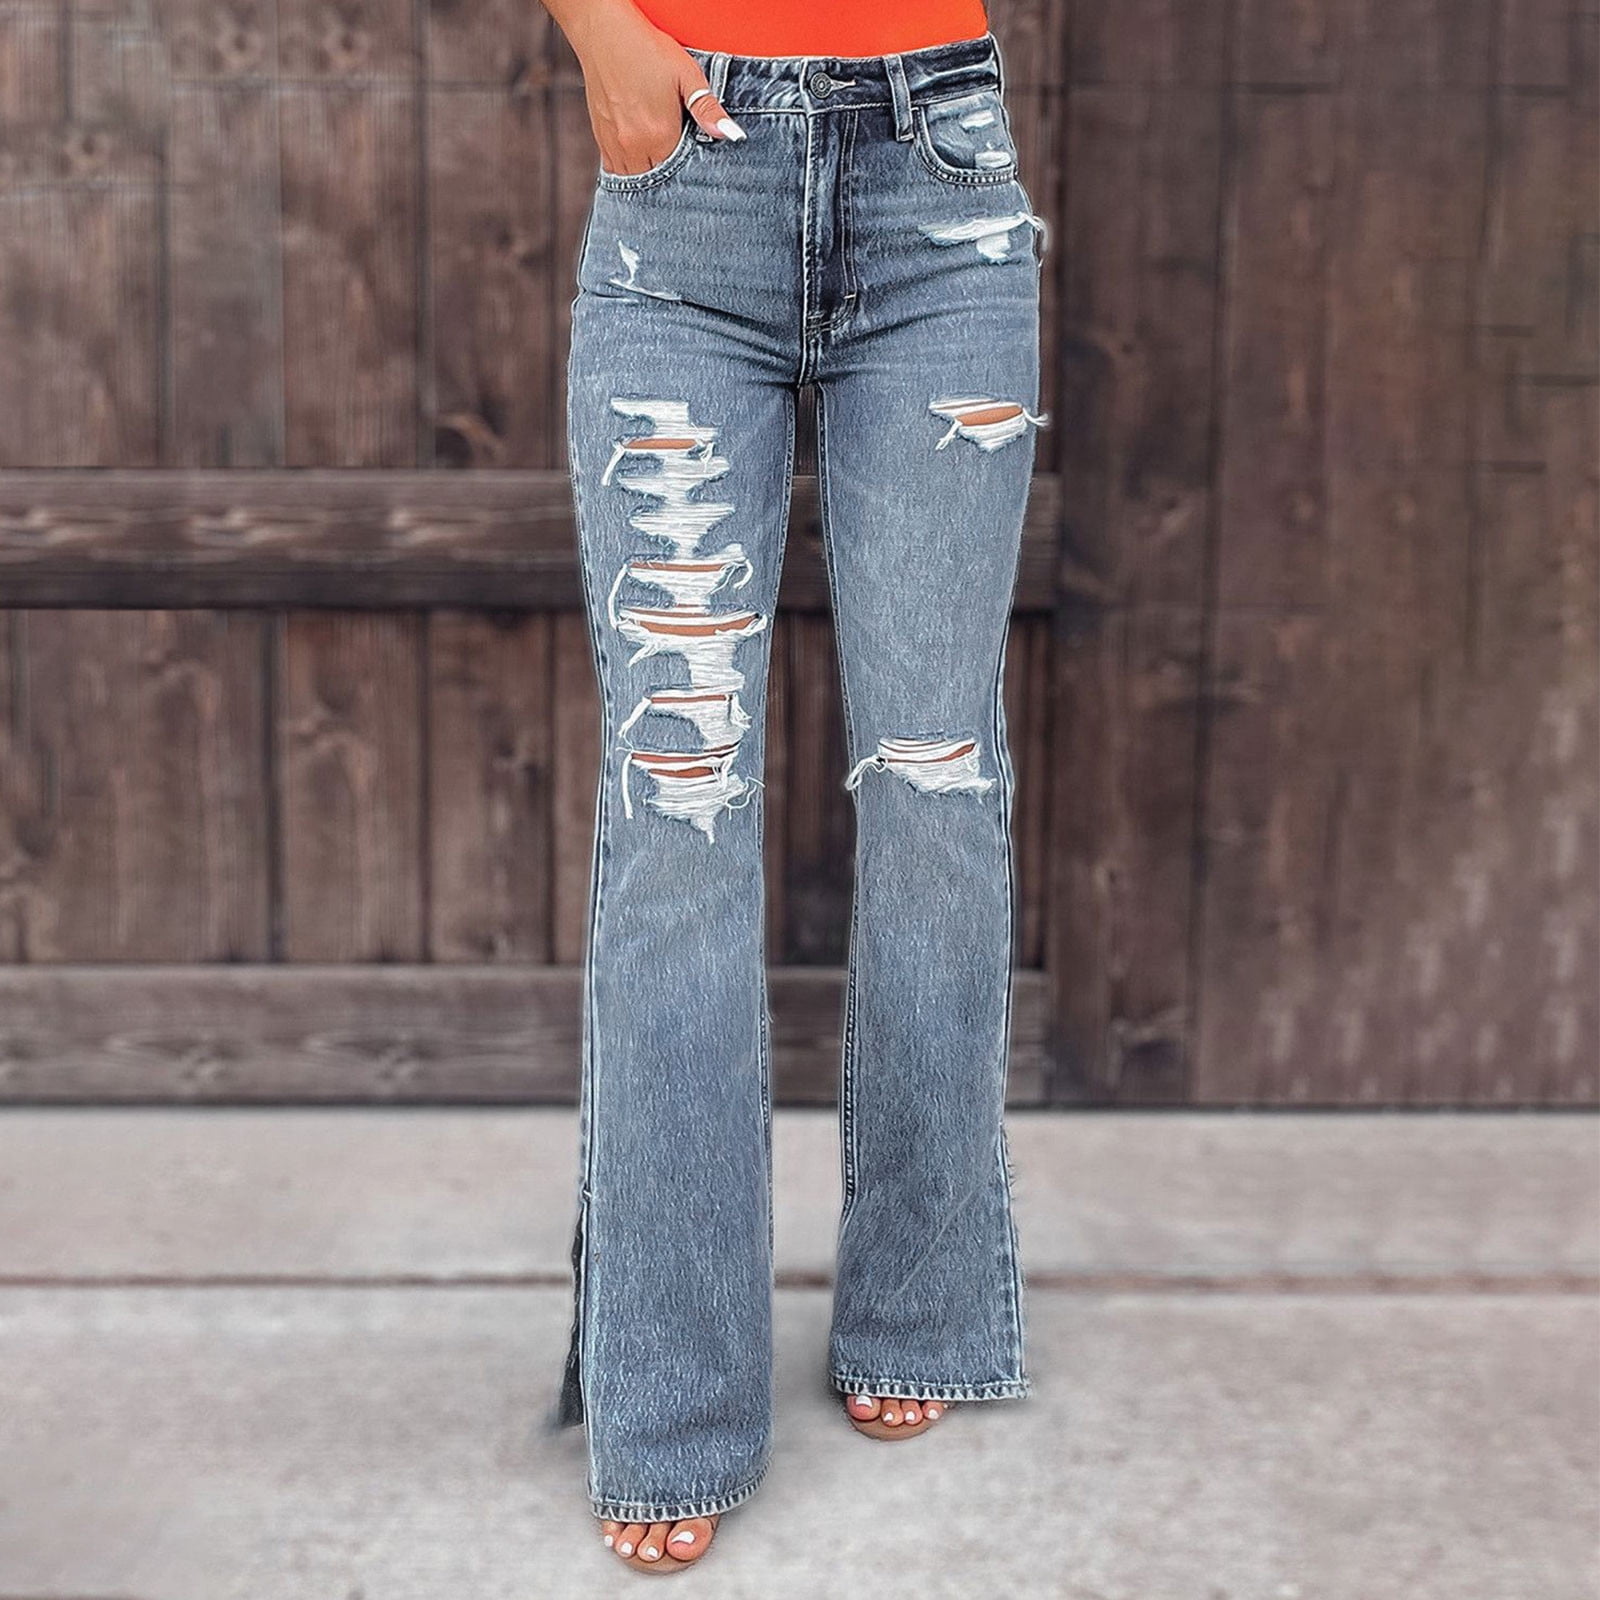 RQYYD Side Split Ripped Jeans Women's Mid Rise Distressed Flare Jeans  Ripped Hole Denim Pants Straight Leg Jean Baggy Bootcut Jean Light Blue XXL